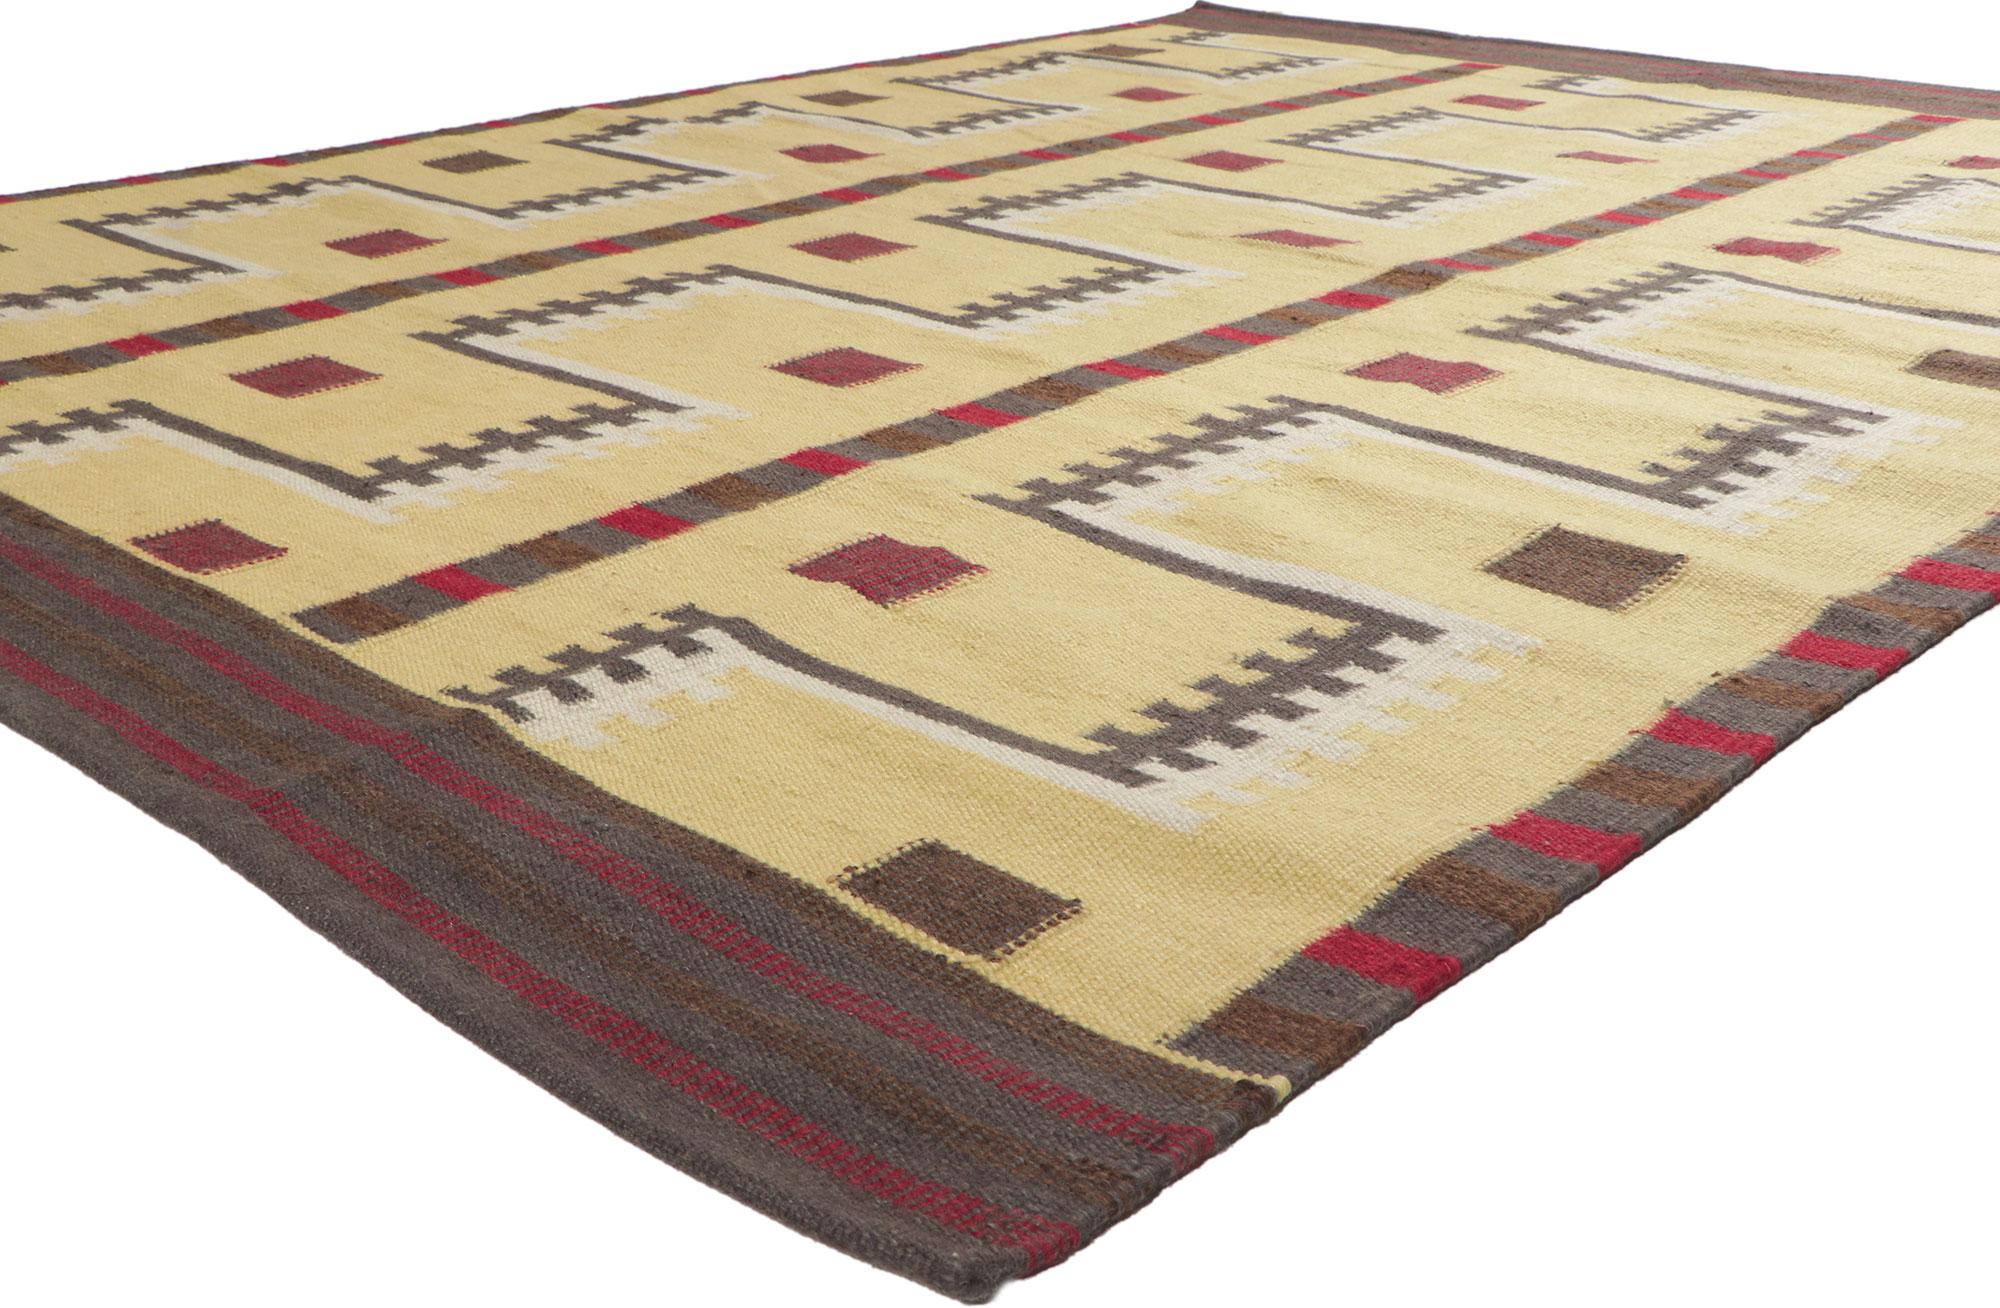 30960 New Swedish Inspired Kilim Rug, 07'11 x 10'03. ?Showcasing the bolder side of Scandinavian design, this handwoven Swedish style kilim rug is a captivating vision of woven beauty. The eye-catching geometric design and blue hues woven into this